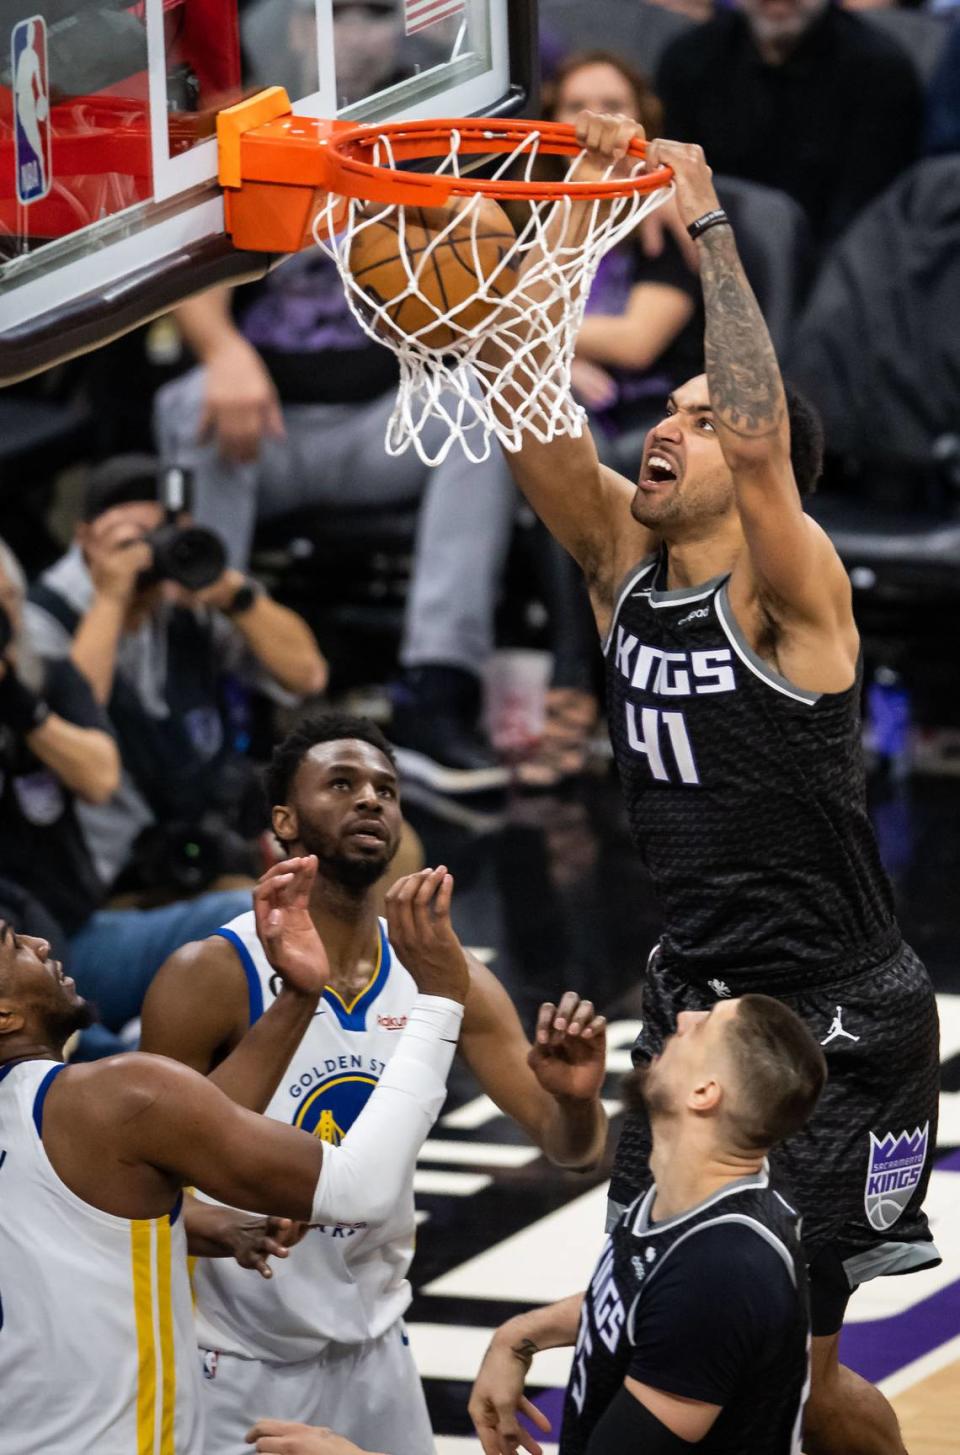 Sacramento Kings forward Trey Lyles (41) dunks the ball against the Golden State Warriors during the second half of Game 1 of the first-round NBA basketball playoff series at Golden 1 Center on Saturday, April 15, 2023.